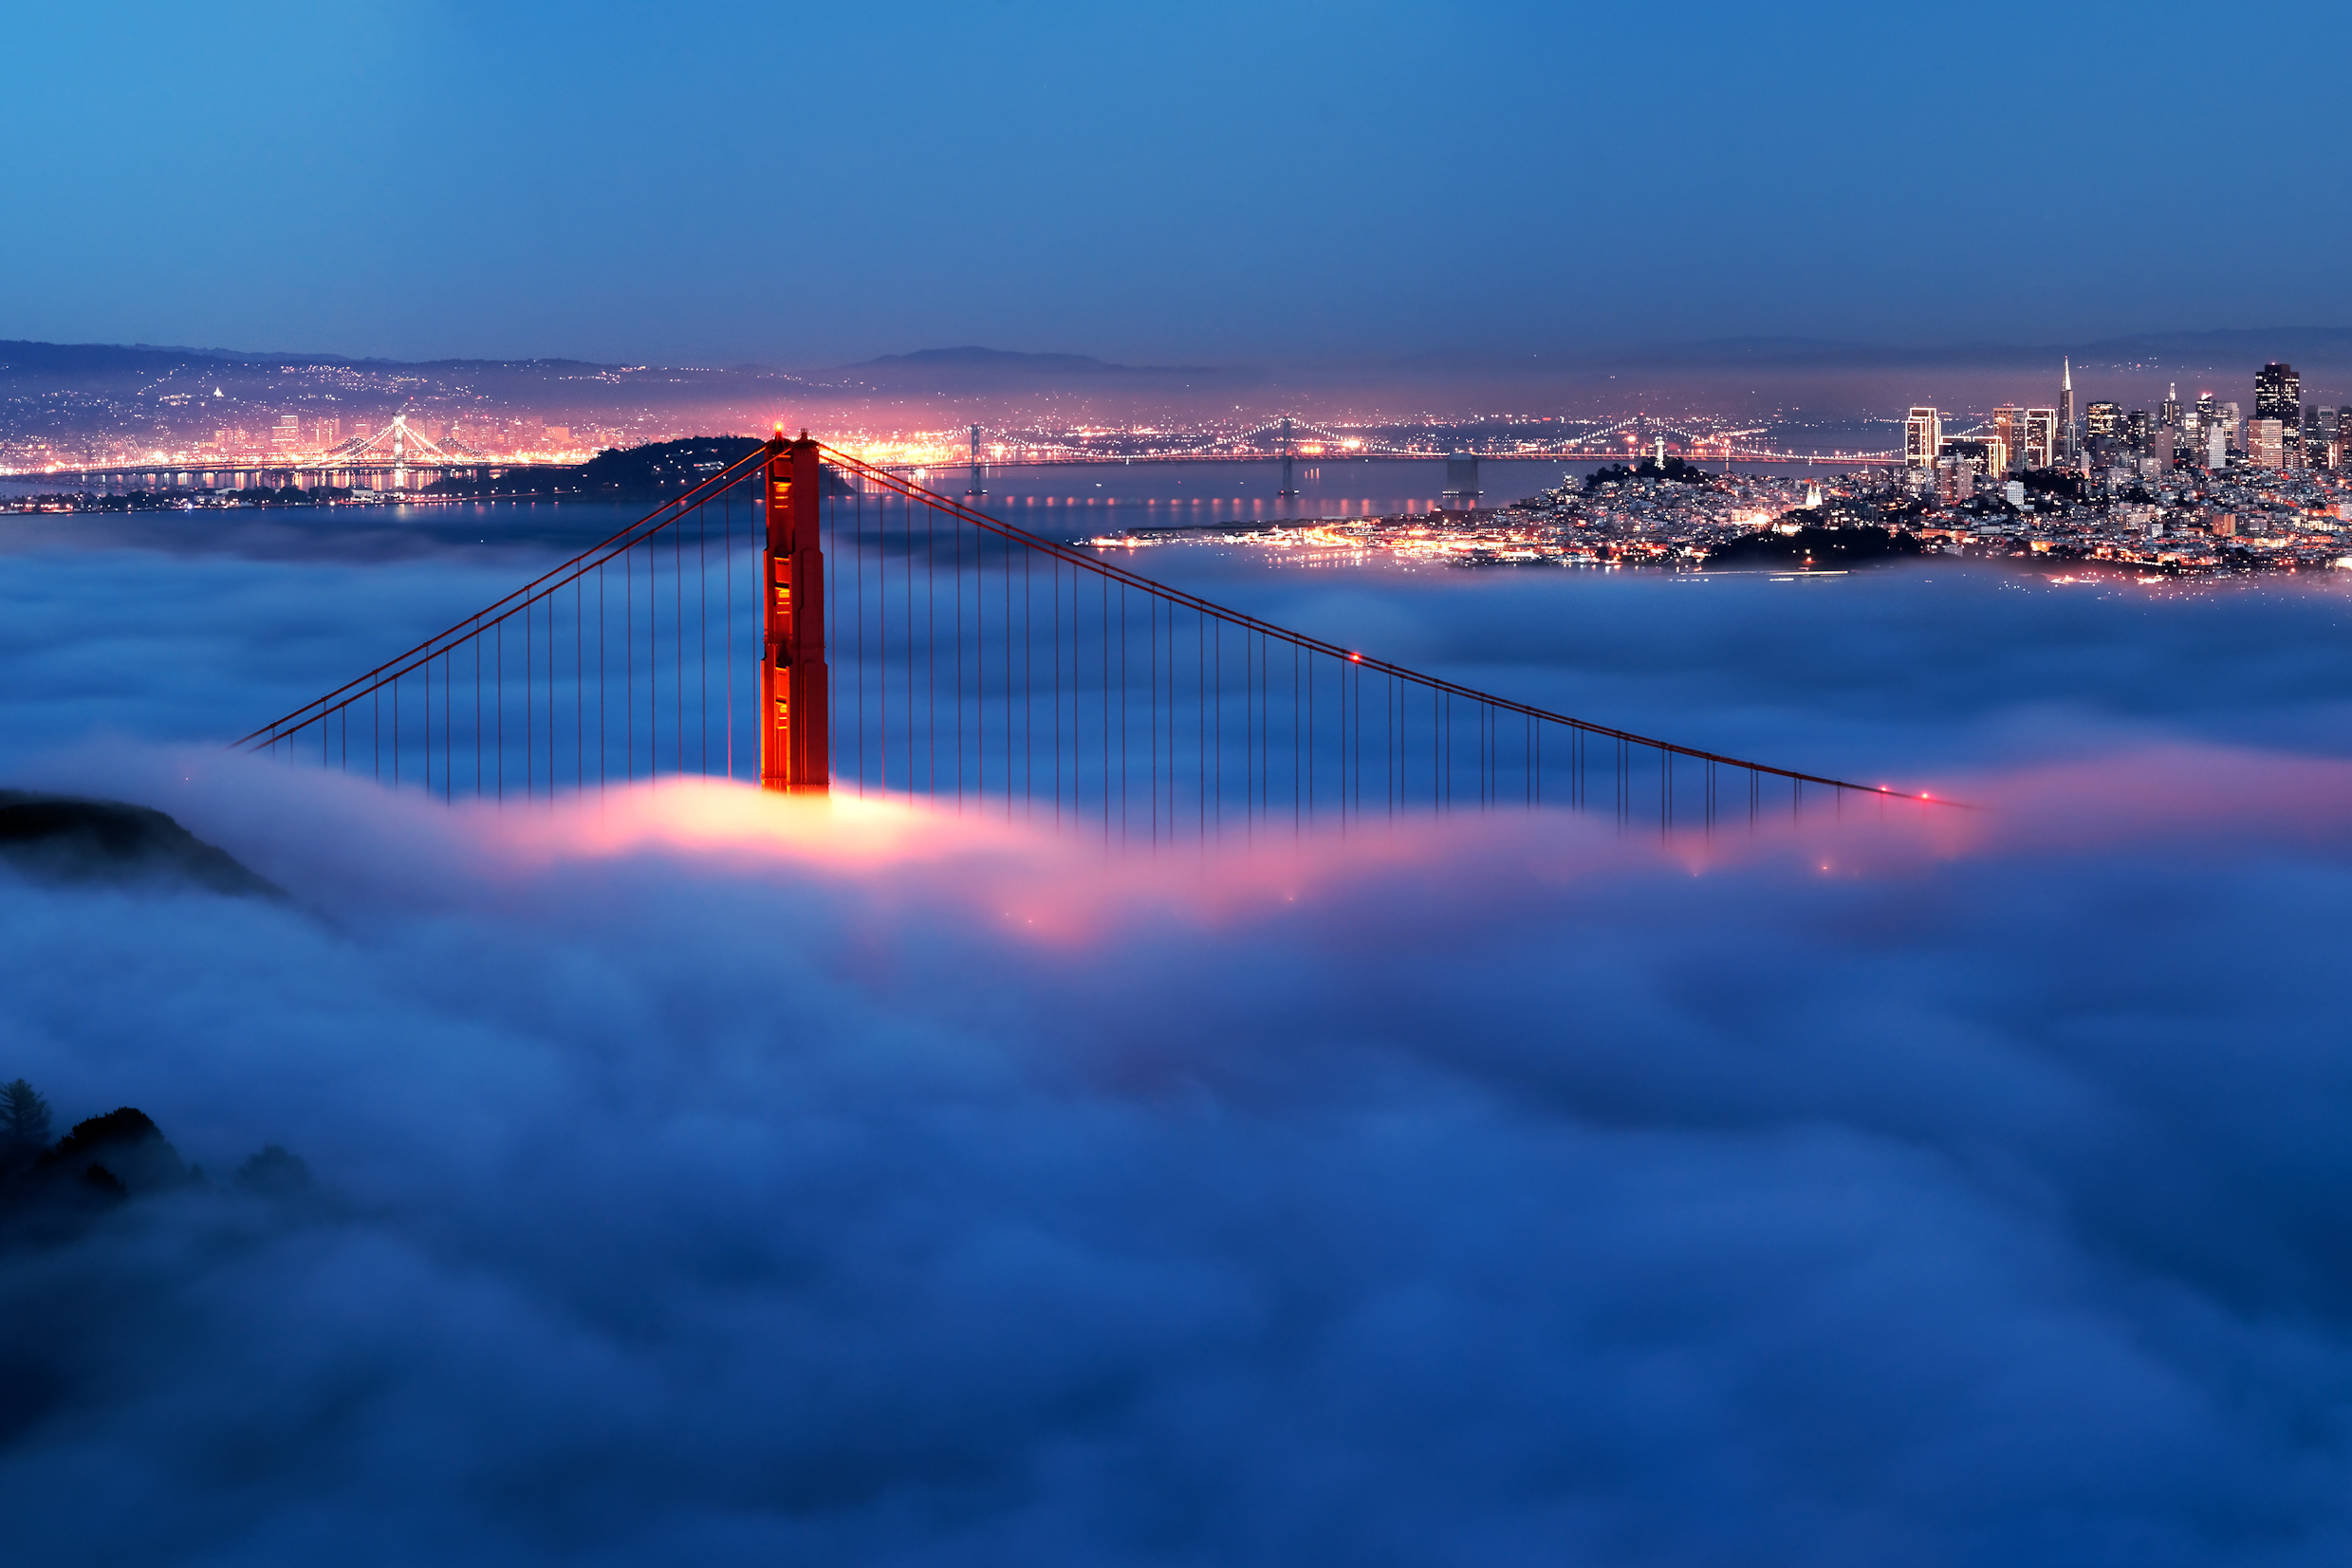 A tower of the Golden Gate Bridge peaking above the fog with the lit-up skyline of SF and Oakland behind.